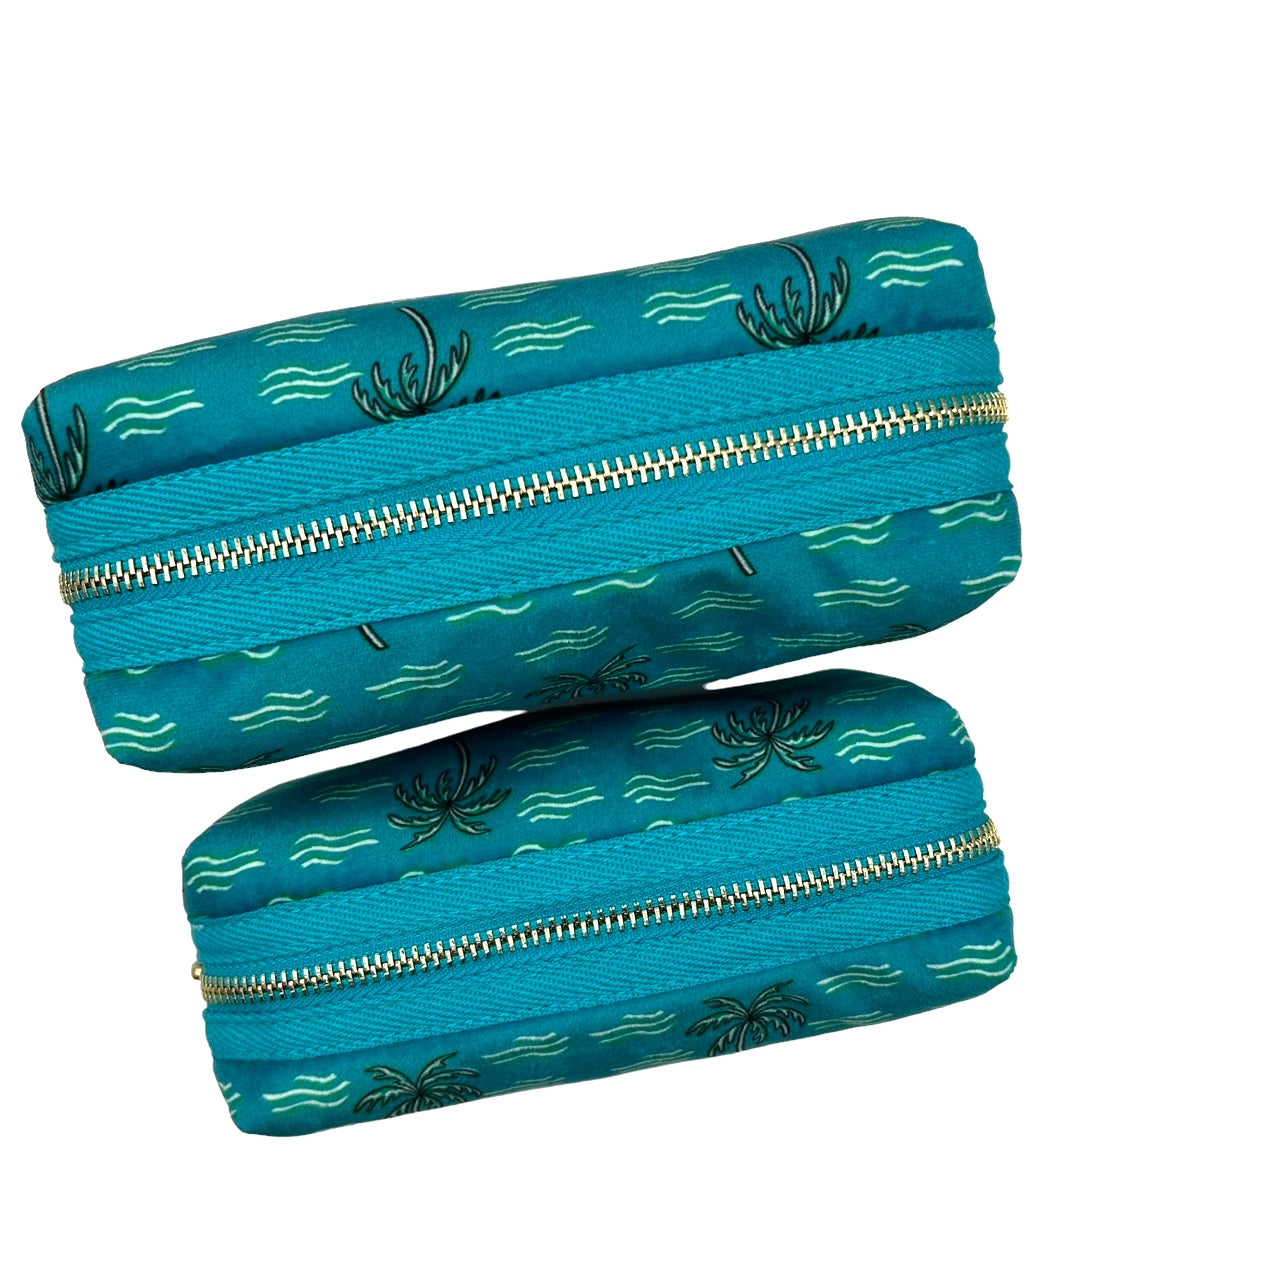 Teal palm large make-up bag & a pineapple brooch - recycled velvet, large and small